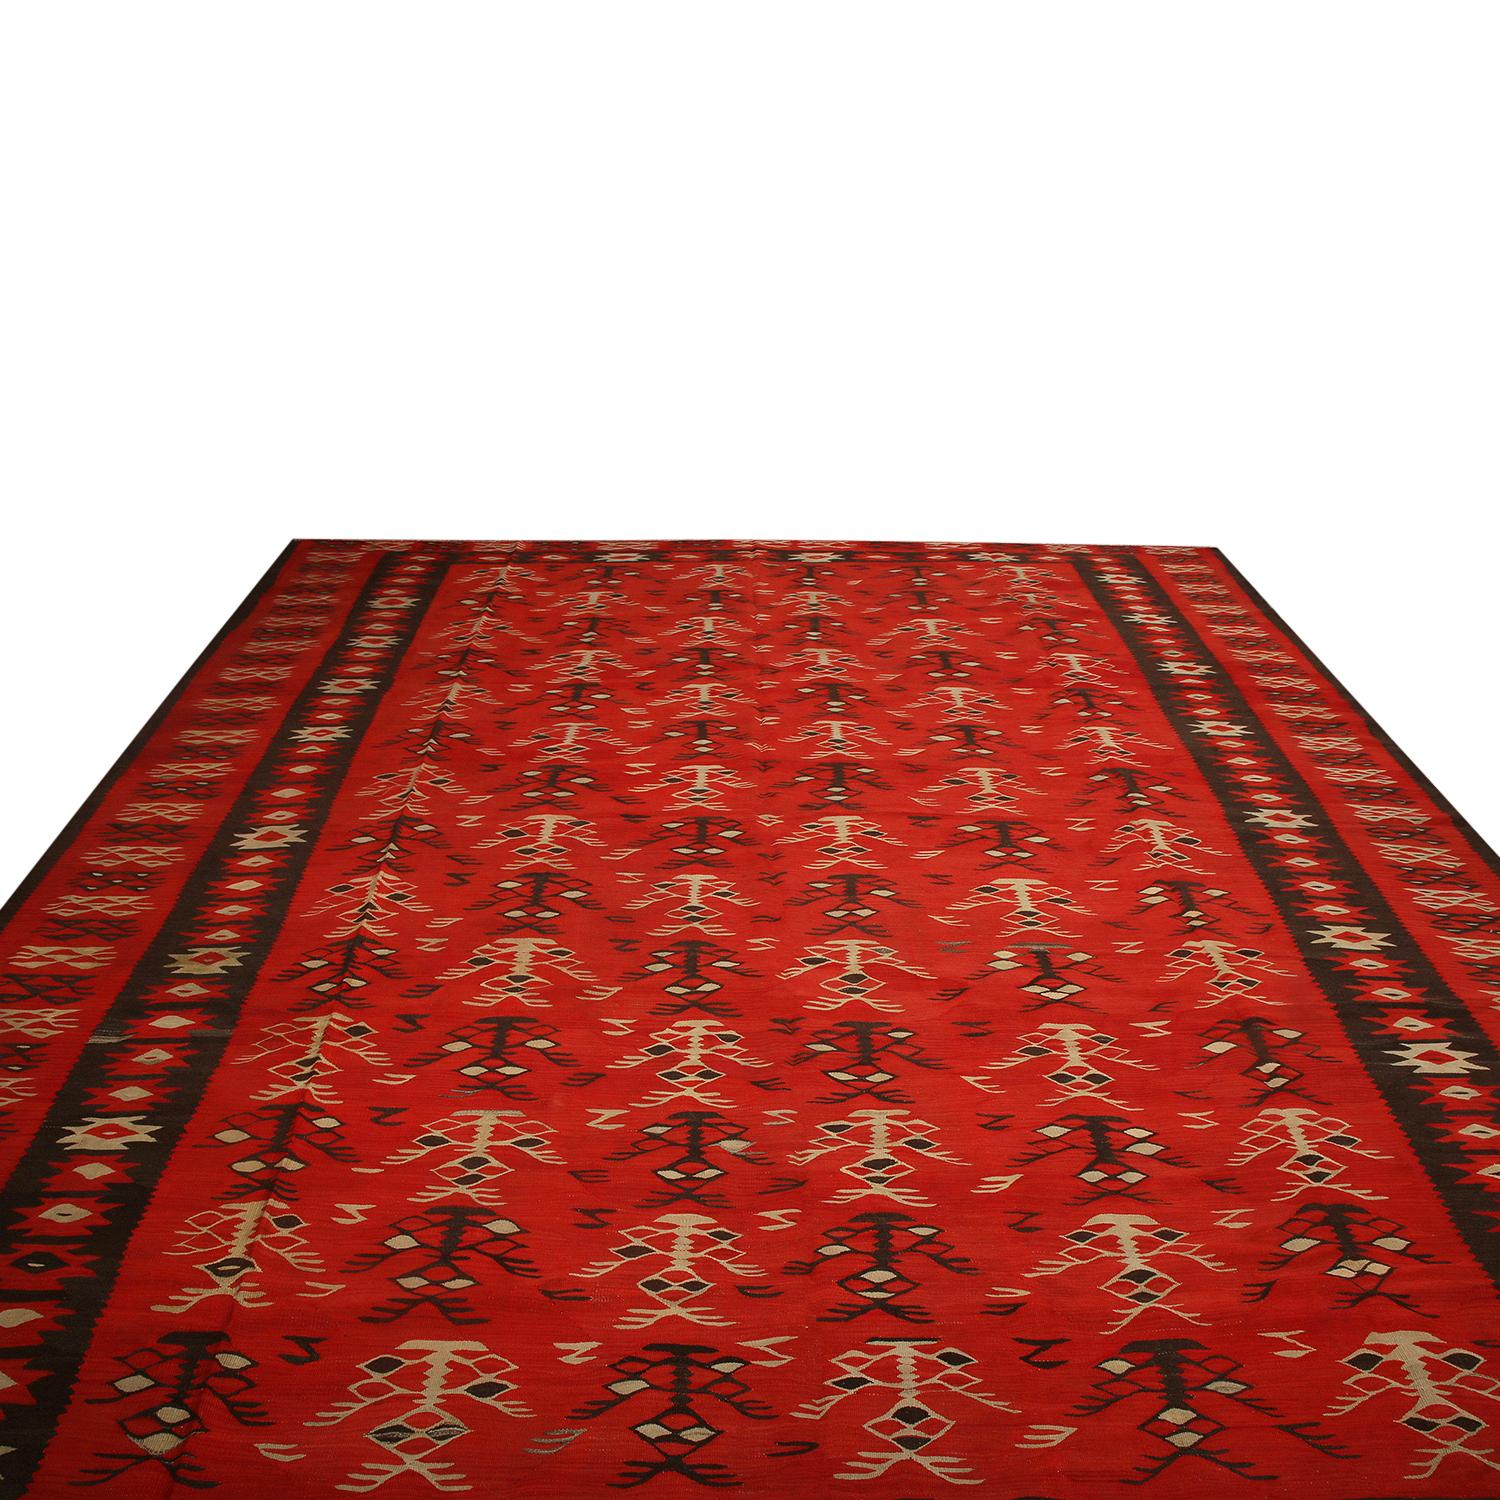 Handwoven in wool circa 1950-1960, a vintage tribal Kilim rug believed to hail from a rare Macedonian provenance. The rare 10x12 large size, distinctive geometry, and play of this particular red with rich brown and beige hues may connote origins in